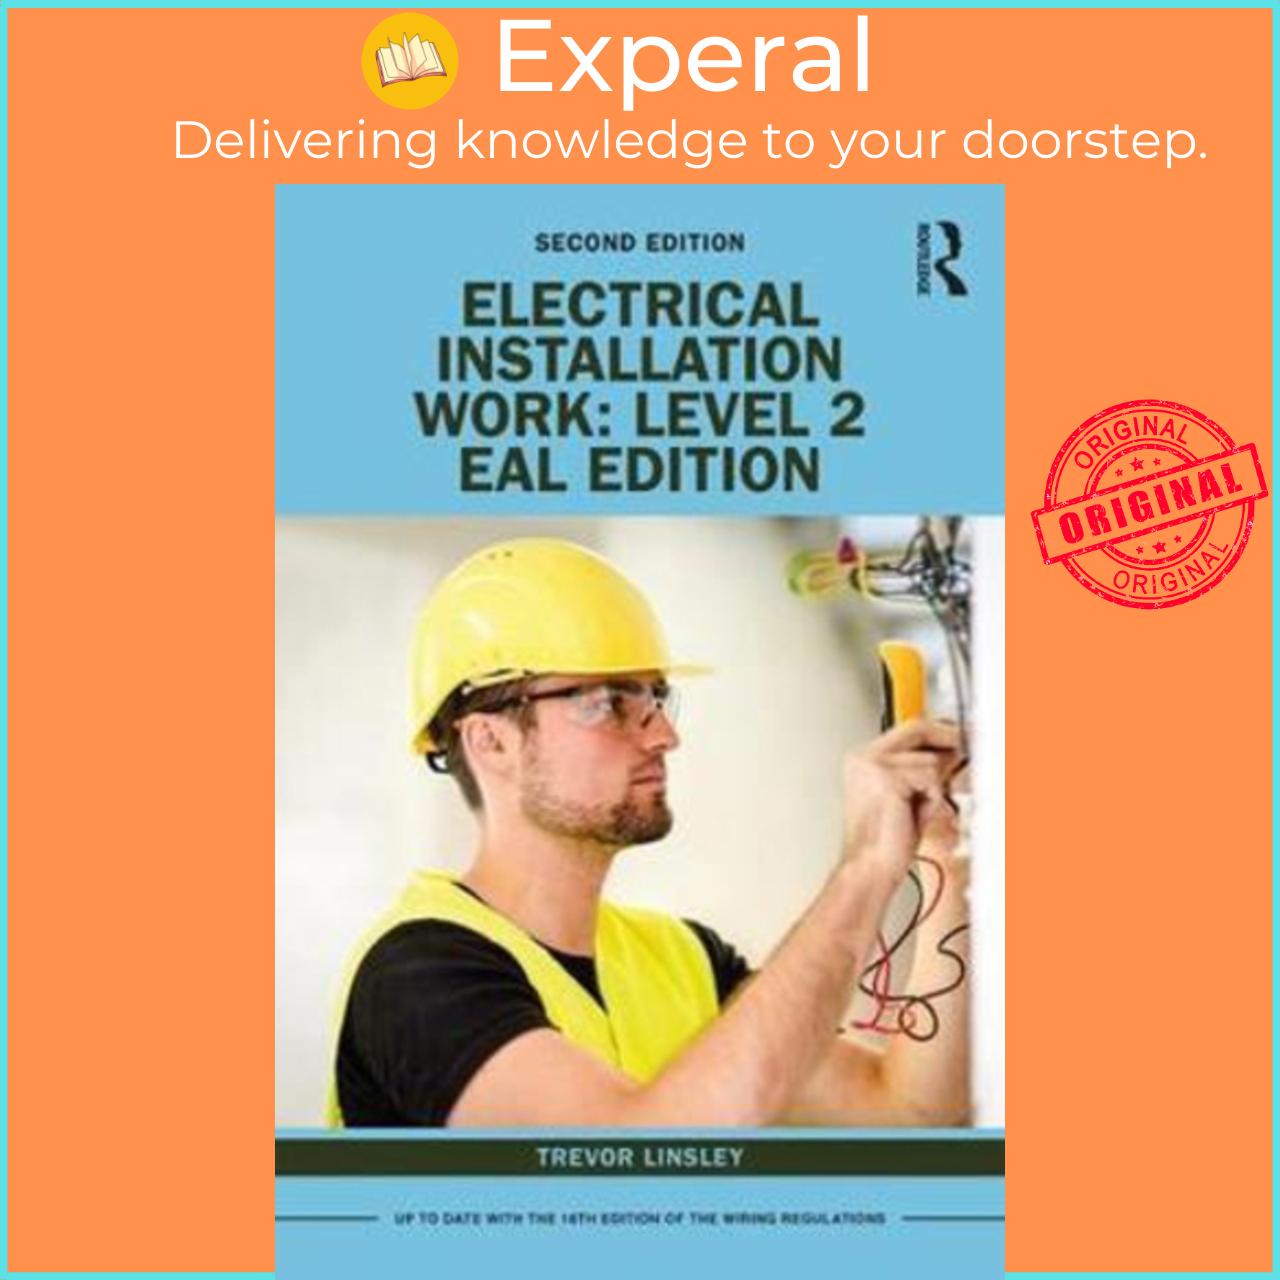 Sách - Electrical Installation Work: Level 2 : EAL Edition by Trevor Linsley (UK edition, paperback)